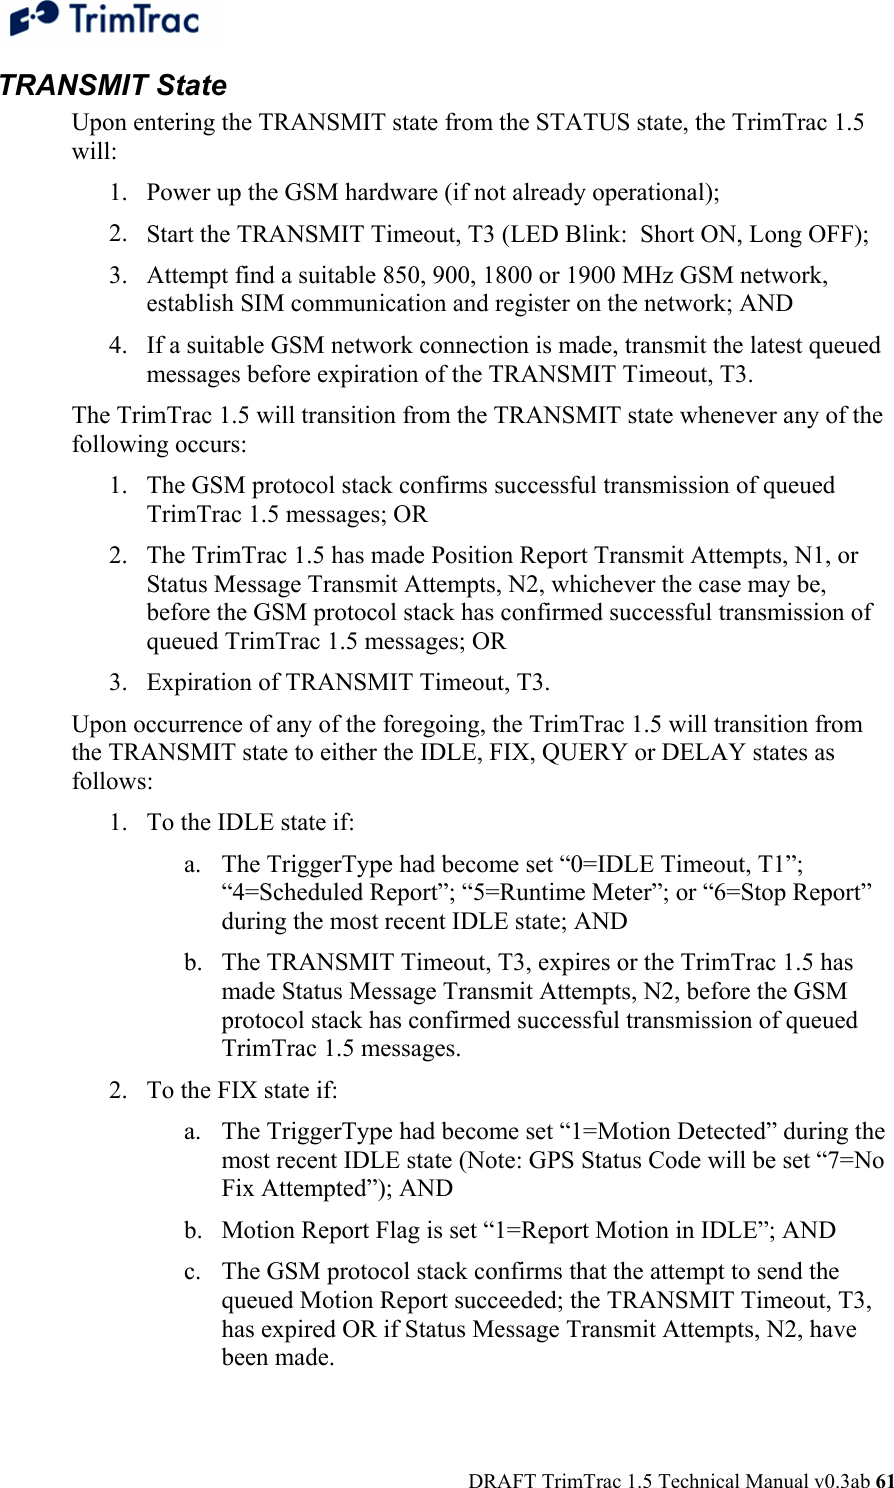  DRAFT TrimTrac 1.5 Technical Manual v0.3ab 61 TRANSMIT State Upon entering the TRANSMIT state from the STATUS state, the TrimTrac 1.5 will: 1. Power up the GSM hardware (if not already operational); 2. Start the TRANSMIT Timeout, T3 (LED Blink:  Short ON, Long OFF); 3. Attempt find a suitable 850, 900, 1800 or 1900 MHz GSM network, establish SIM communication and register on the network; AND 4. If a suitable GSM network connection is made, transmit the latest queued messages before expiration of the TRANSMIT Timeout, T3. The TrimTrac 1.5 will transition from the TRANSMIT state whenever any of the following occurs: 1. The GSM protocol stack confirms successful transmission of queued TrimTrac 1.5 messages; OR 2. The TrimTrac 1.5 has made Position Report Transmit Attempts, N1, or Status Message Transmit Attempts, N2, whichever the case may be, before the GSM protocol stack has confirmed successful transmission of queued TrimTrac 1.5 messages; OR 3. Expiration of TRANSMIT Timeout, T3. Upon occurrence of any of the foregoing, the TrimTrac 1.5 will transition from the TRANSMIT state to either the IDLE, FIX, QUERY or DELAY states as follows: 1. To the IDLE state if: a. The TriggerType had become set “0=IDLE Timeout, T1”; “4=Scheduled Report”; “5=Runtime Meter”; or “6=Stop Report” during the most recent IDLE state; AND b. The TRANSMIT Timeout, T3, expires or the TrimTrac 1.5 has made Status Message Transmit Attempts, N2, before the GSM protocol stack has confirmed successful transmission of queued TrimTrac 1.5 messages. 2. To the FIX state if: a. The TriggerType had become set “1=Motion Detected” during the most recent IDLE state (Note: GPS Status Code will be set “7=No Fix Attempted”); AND b. Motion Report Flag is set “1=Report Motion in IDLE”; AND c. The GSM protocol stack confirms that the attempt to send the queued Motion Report succeeded; the TRANSMIT Timeout, T3, has expired OR if Status Message Transmit Attempts, N2, have been made. 